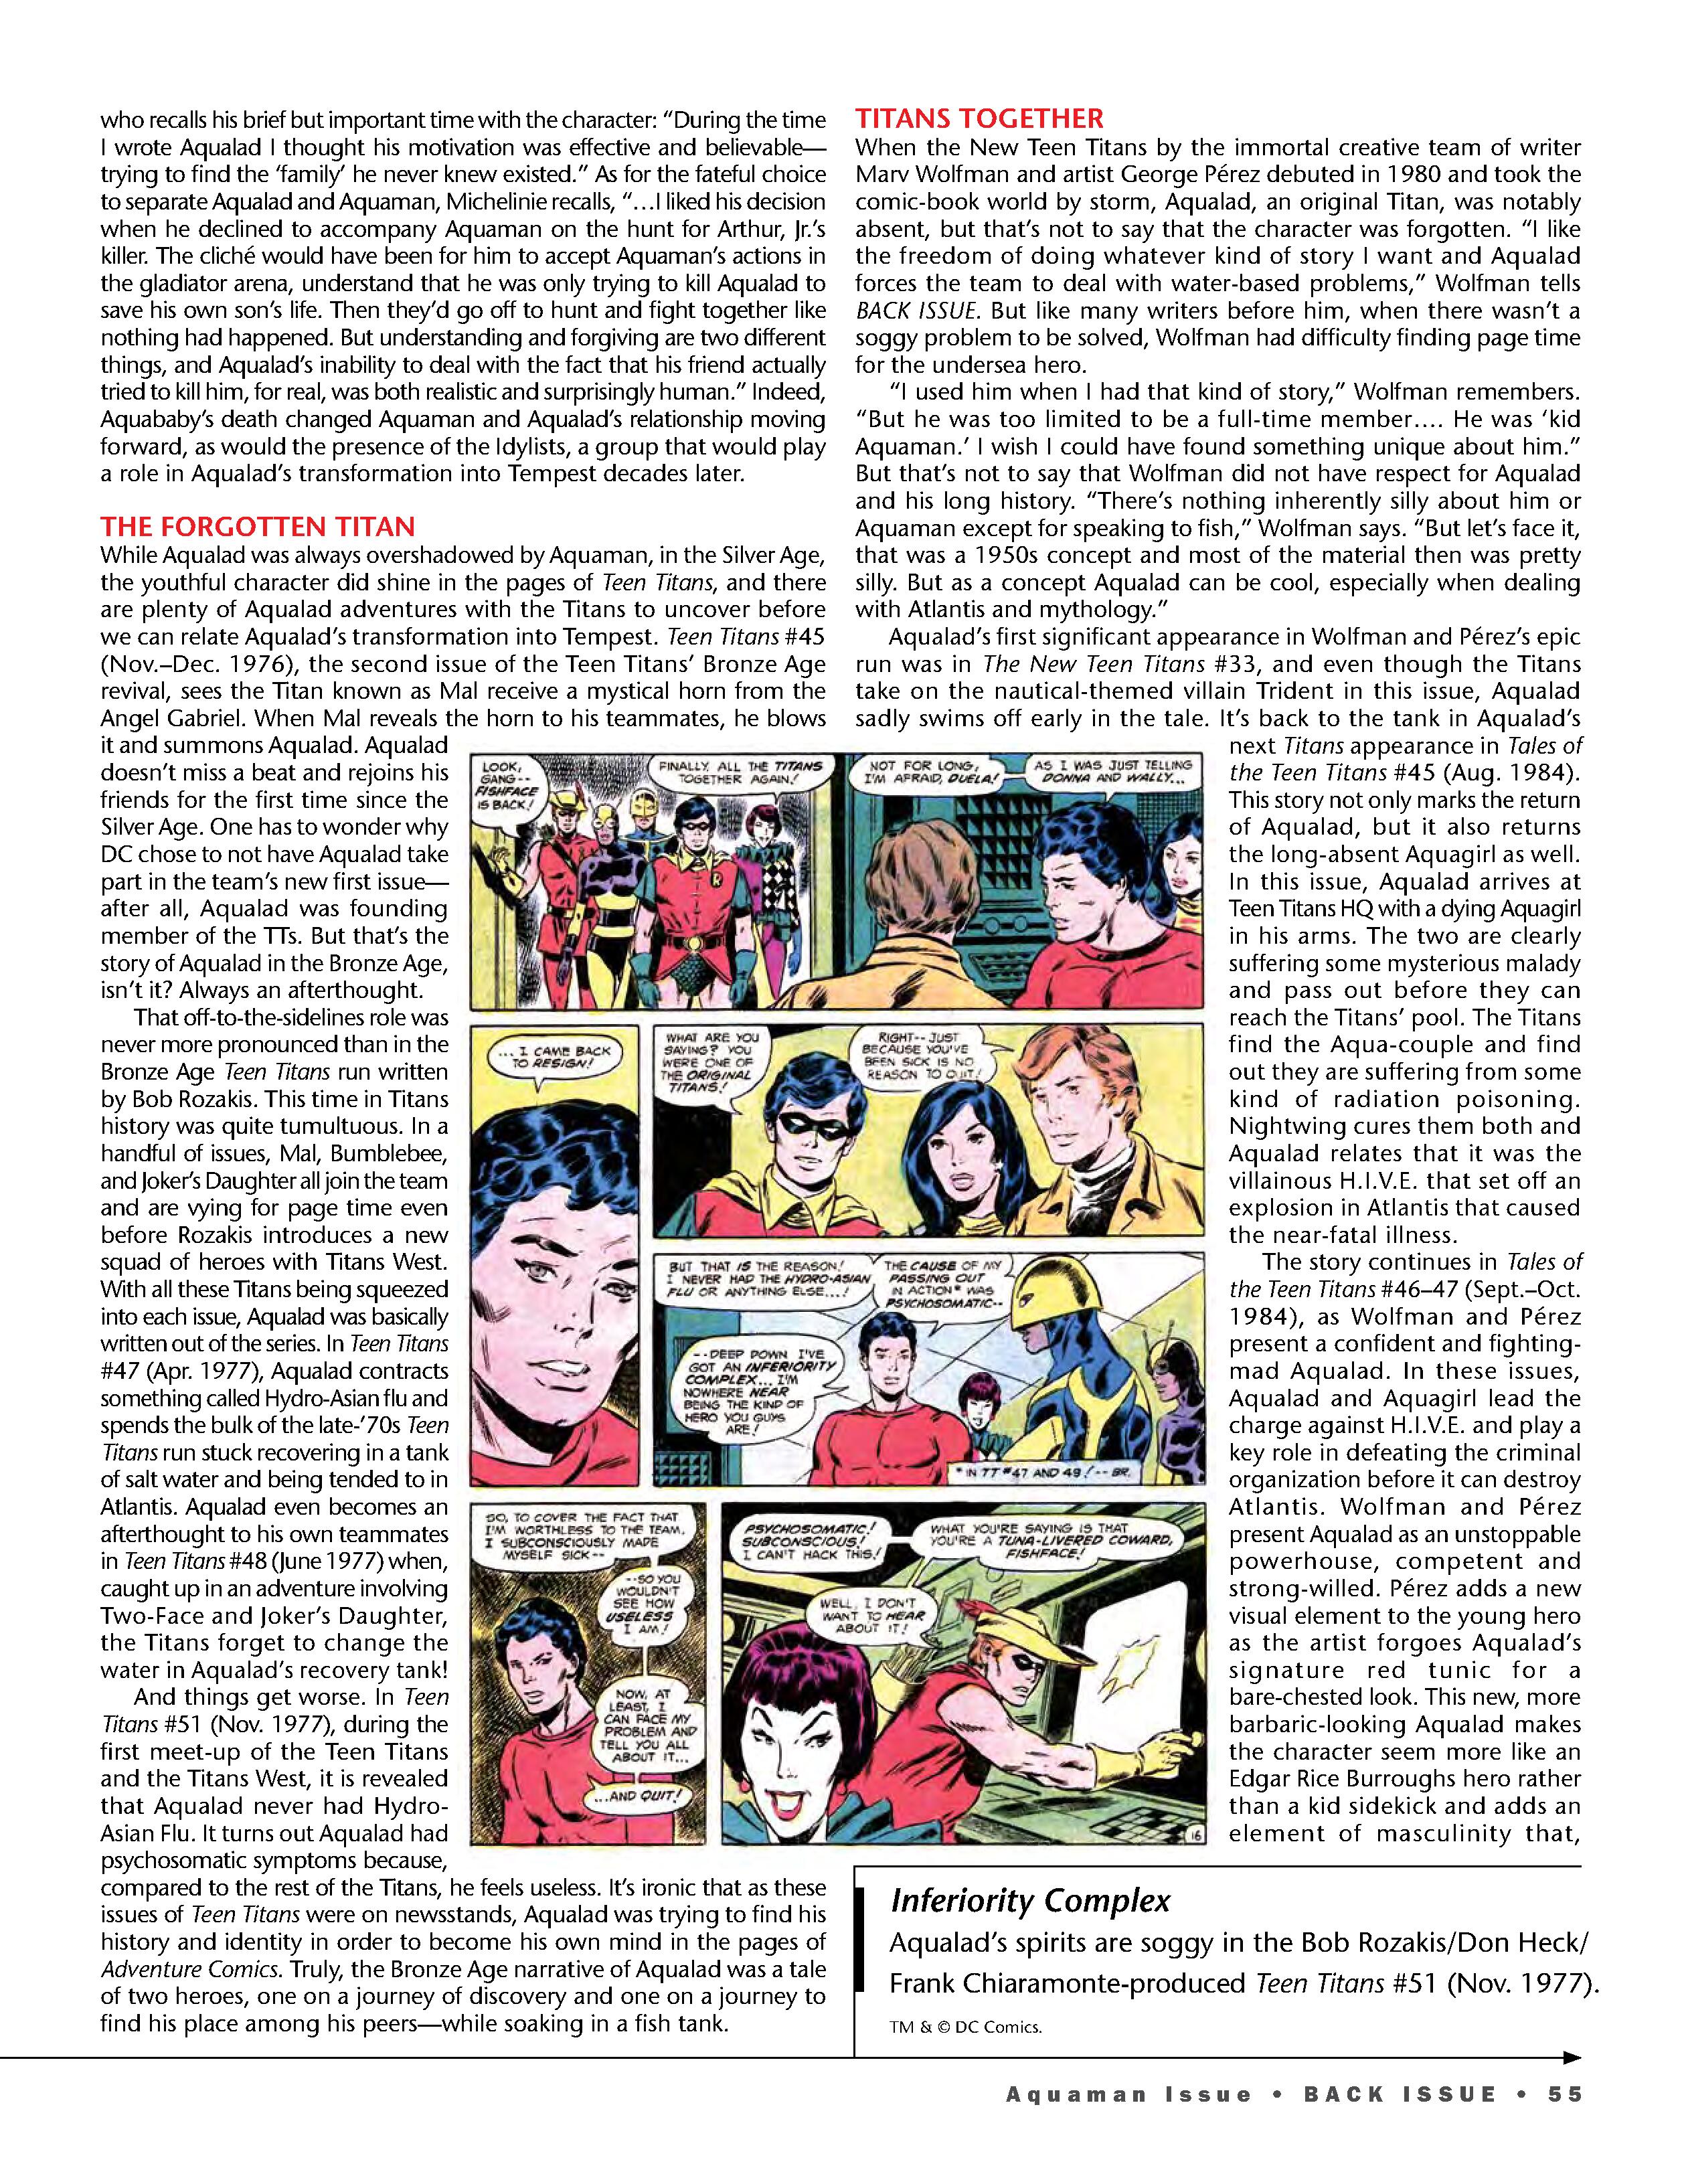 Read online Back Issue comic -  Issue #108 - 57